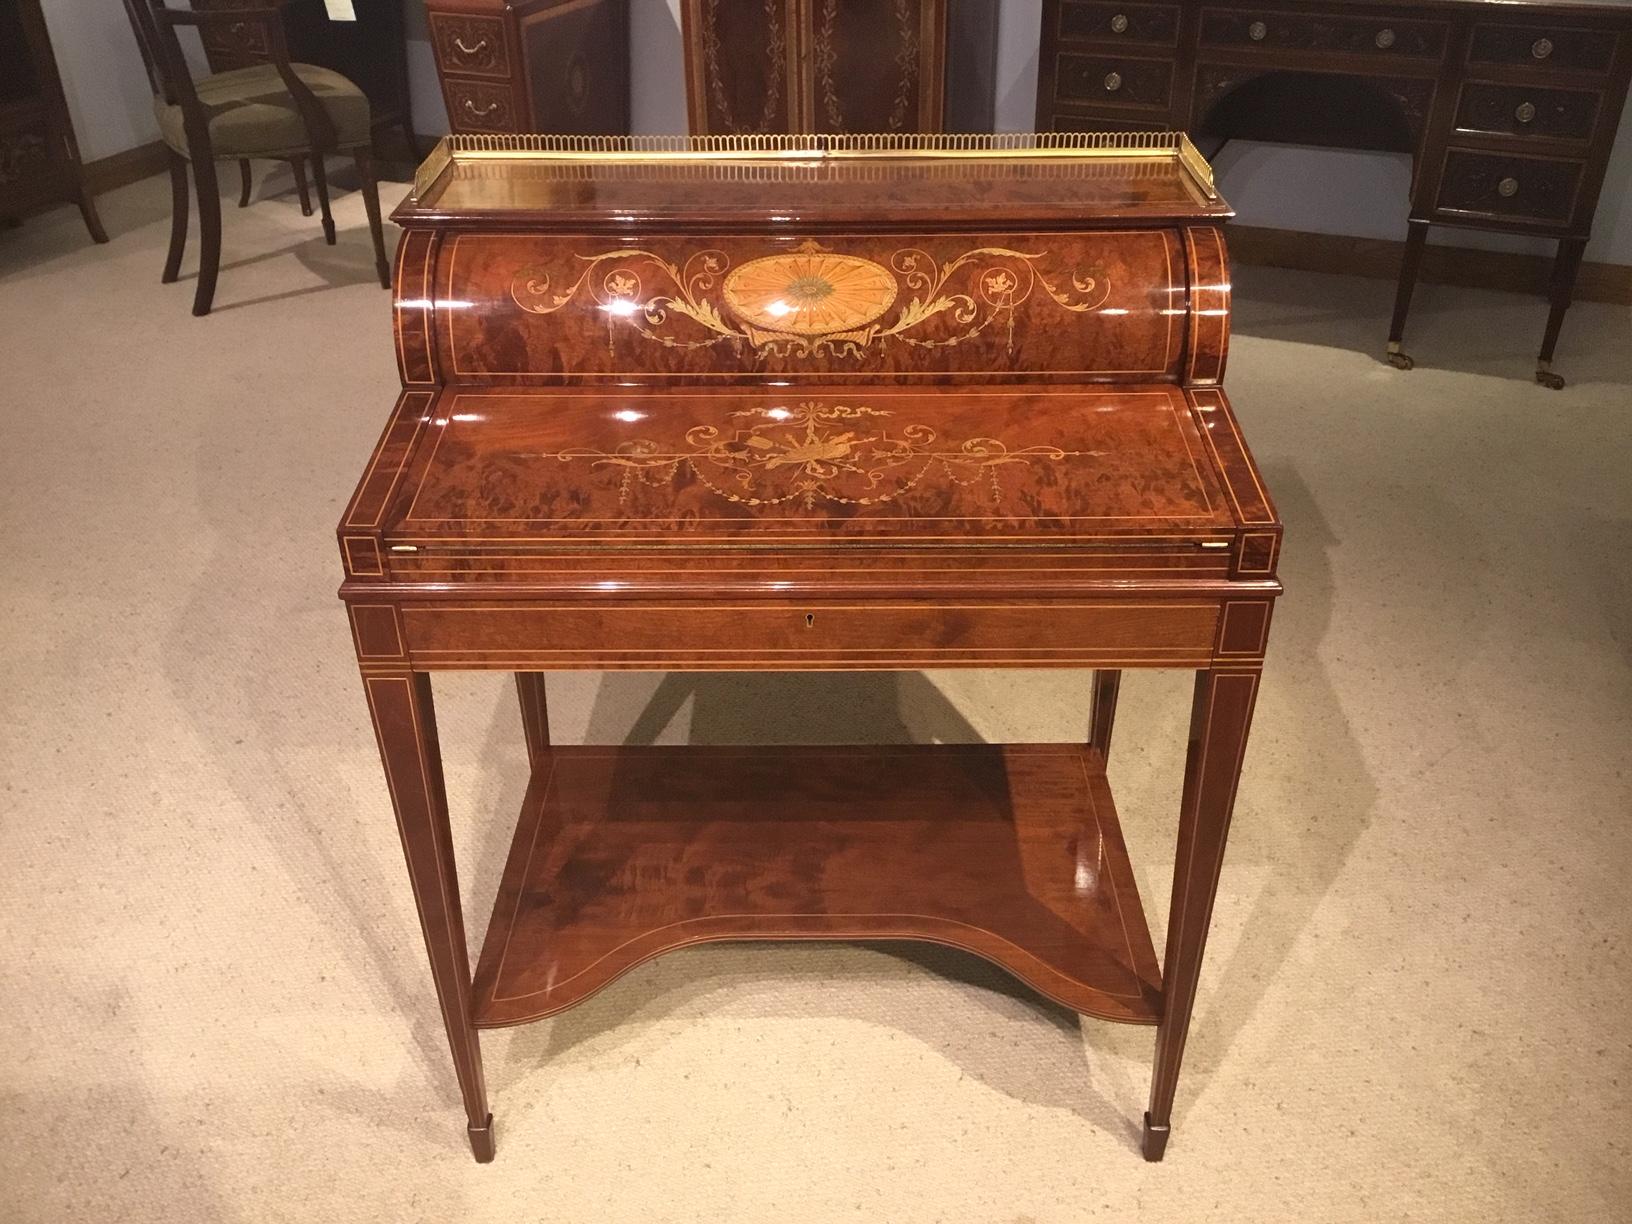 A stunning quality marquetry inlaid cylinder bureau by Maple & Co. of London. The brass balustrade gallery above the well figured mahogany super structure which has two fantastic marquetry and pen-work panels, one on the cylinder front and one to